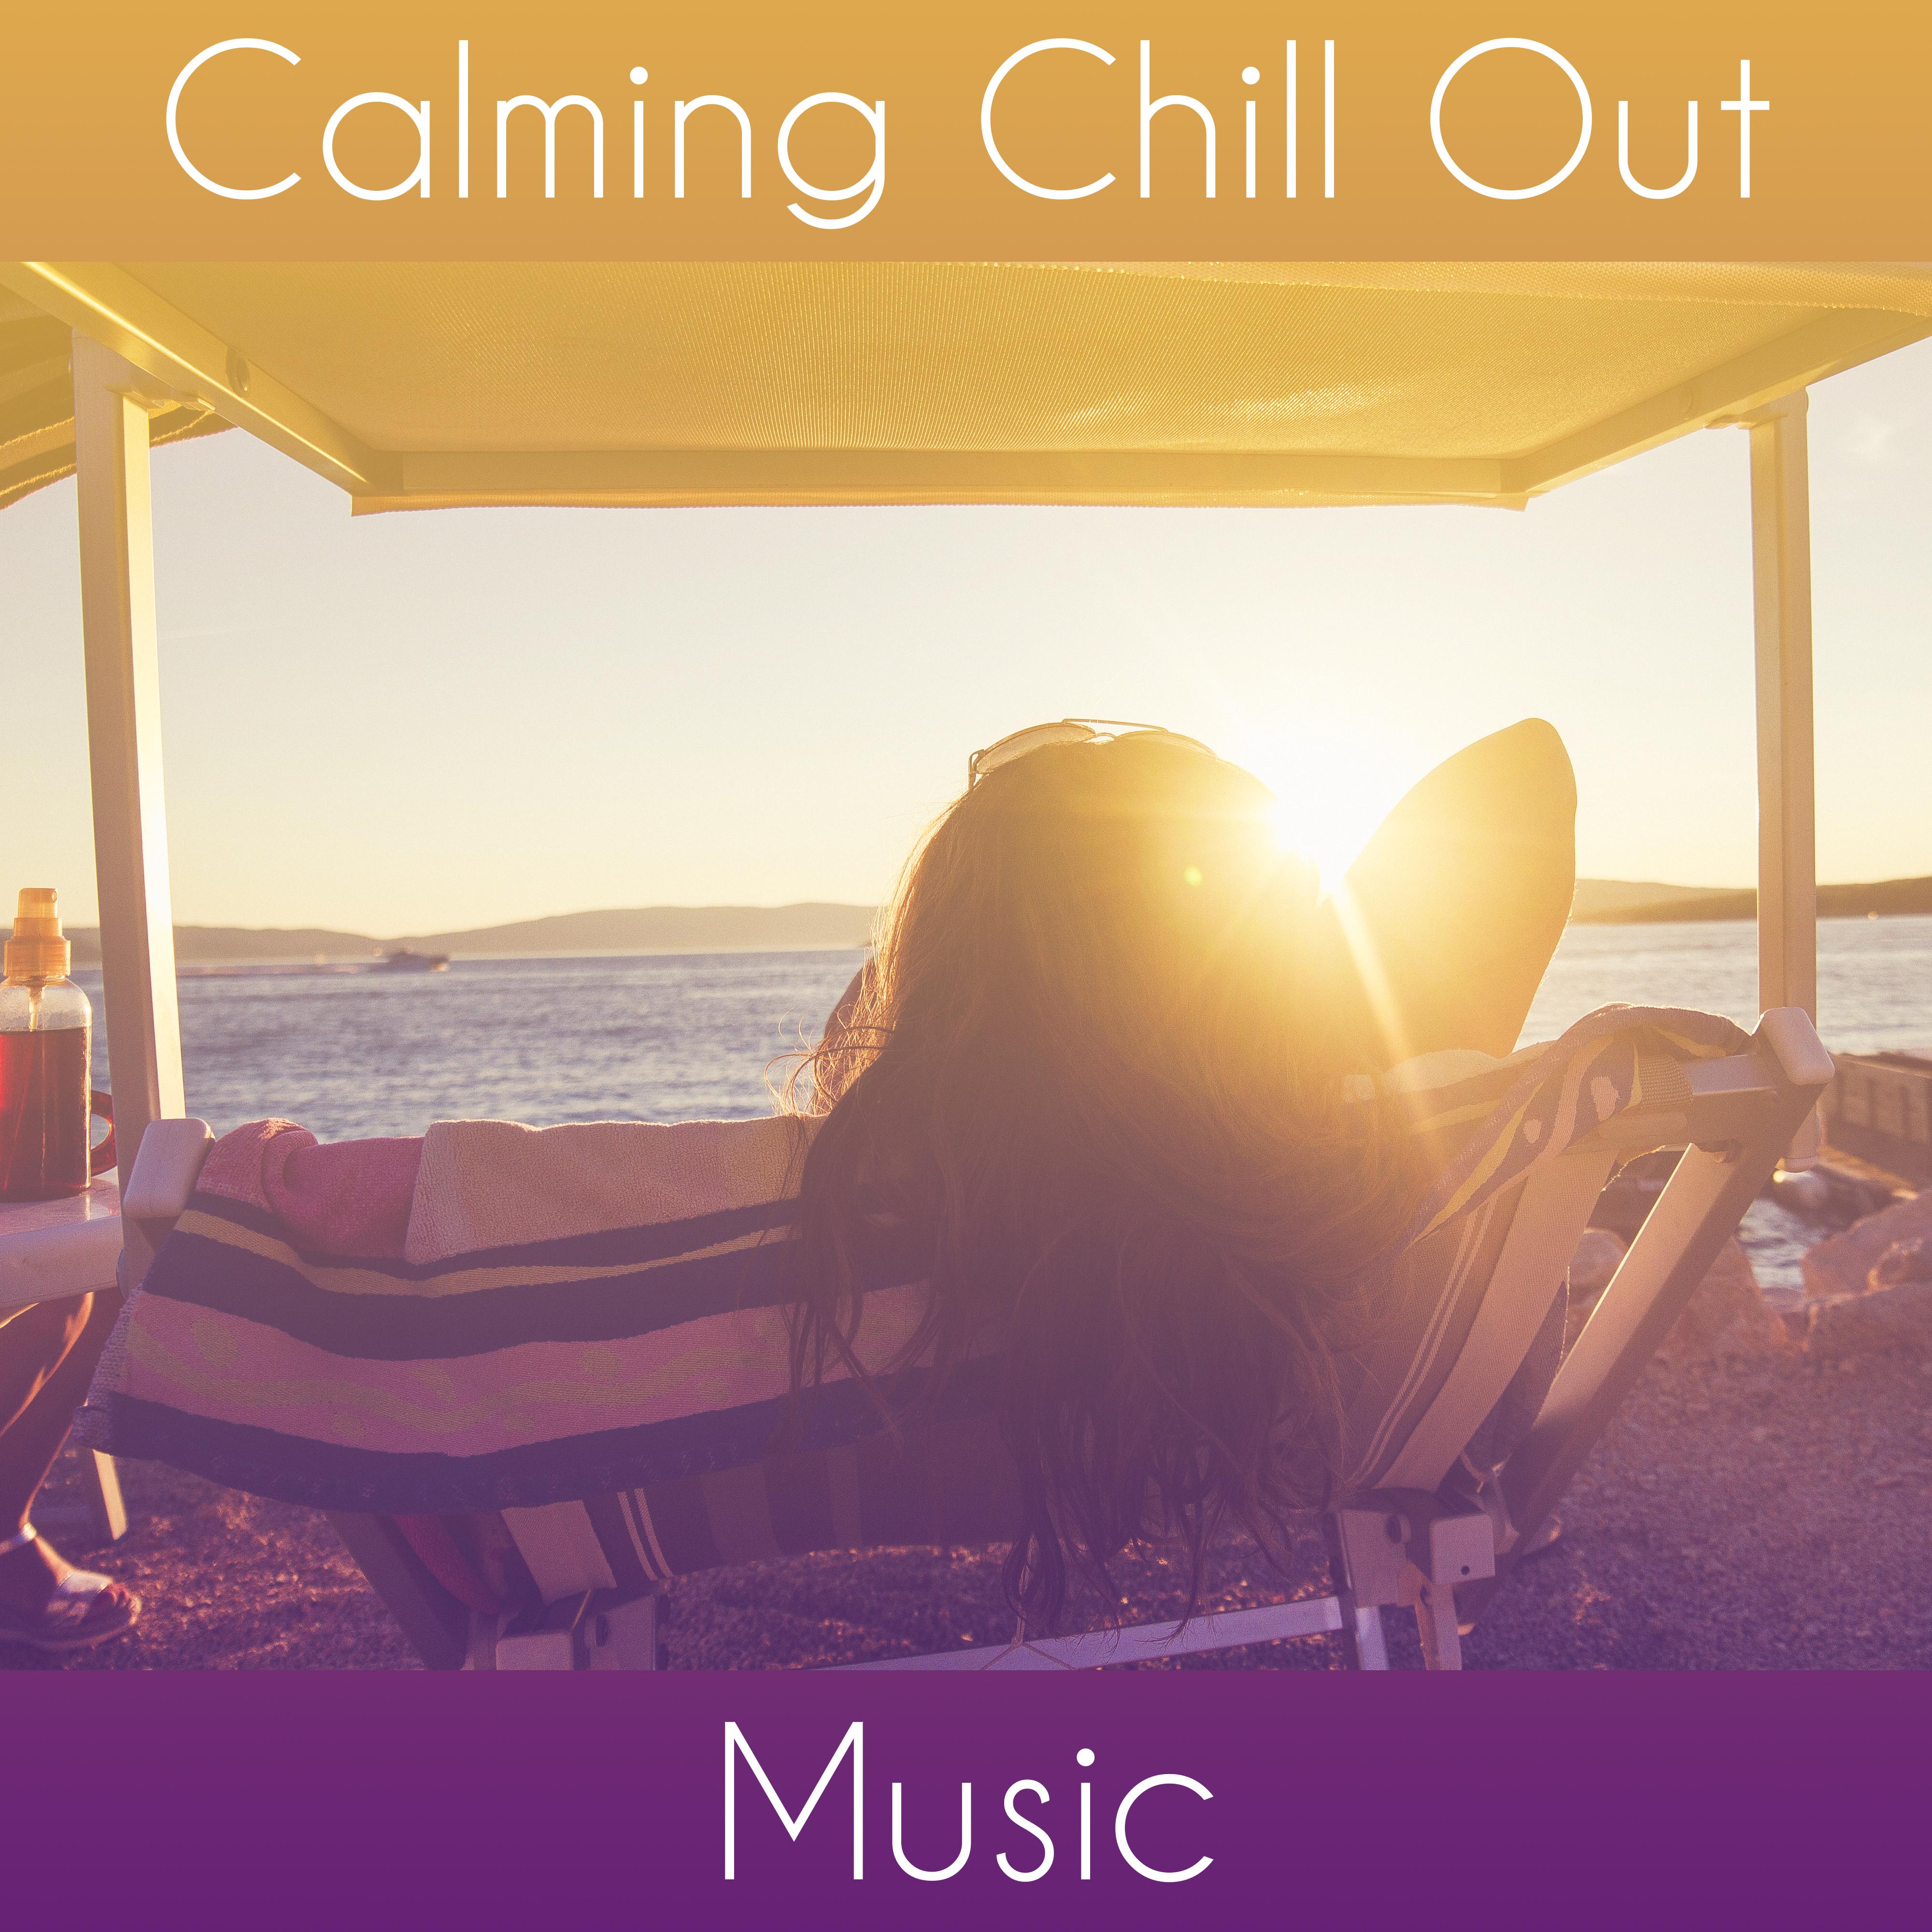 Calming Chill Out Music – Rest on the Beach, Chillout Sounds, Music to Calm Down, Chill Out Vibes